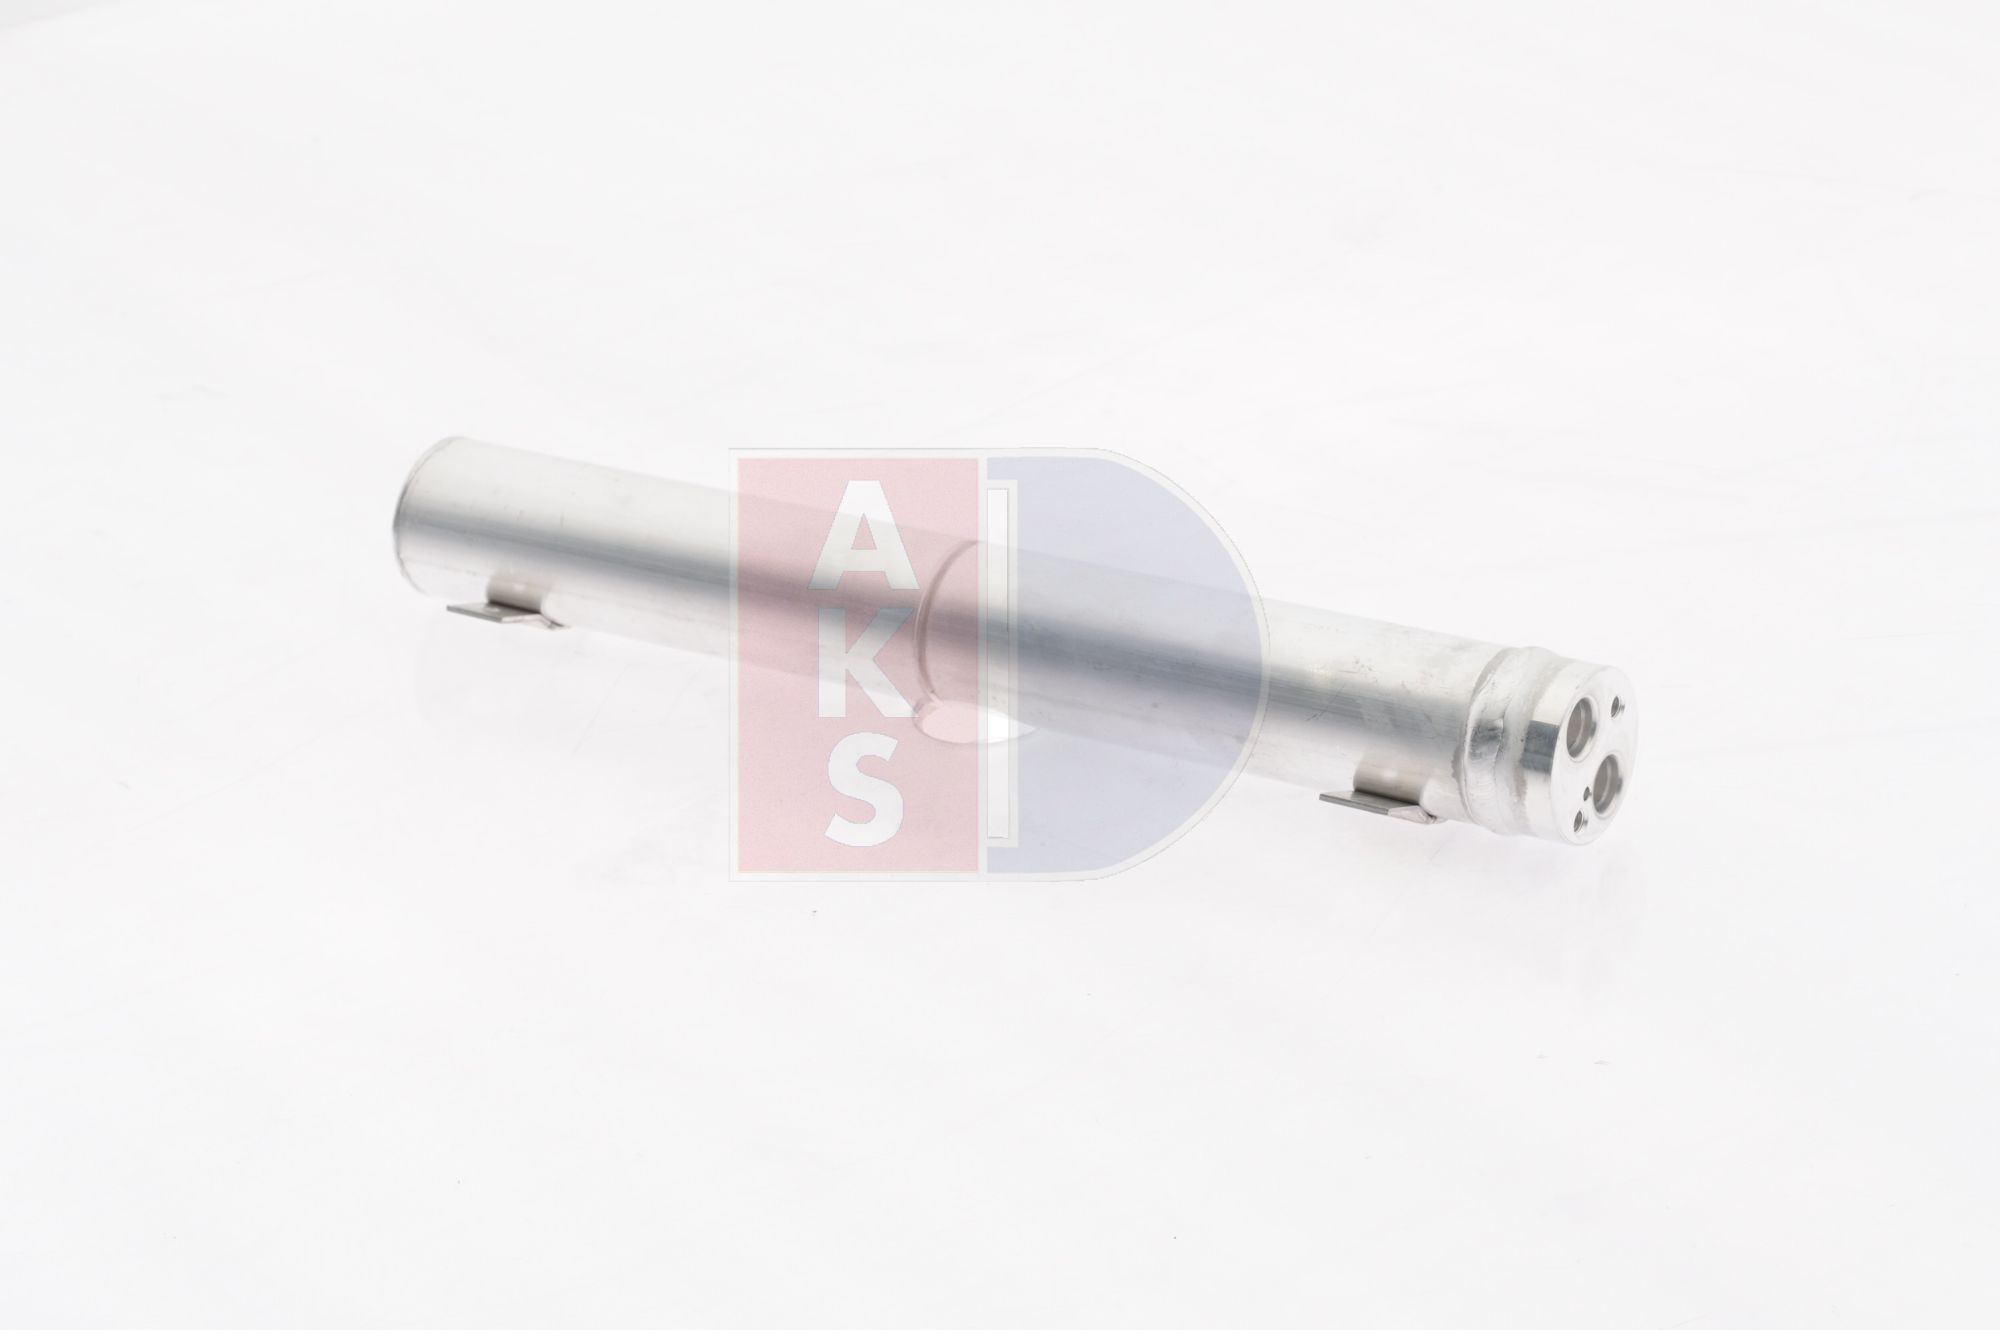 Mercedes A-Class Air conditioning dryer 421252 AKS DASIS 800561N online buy